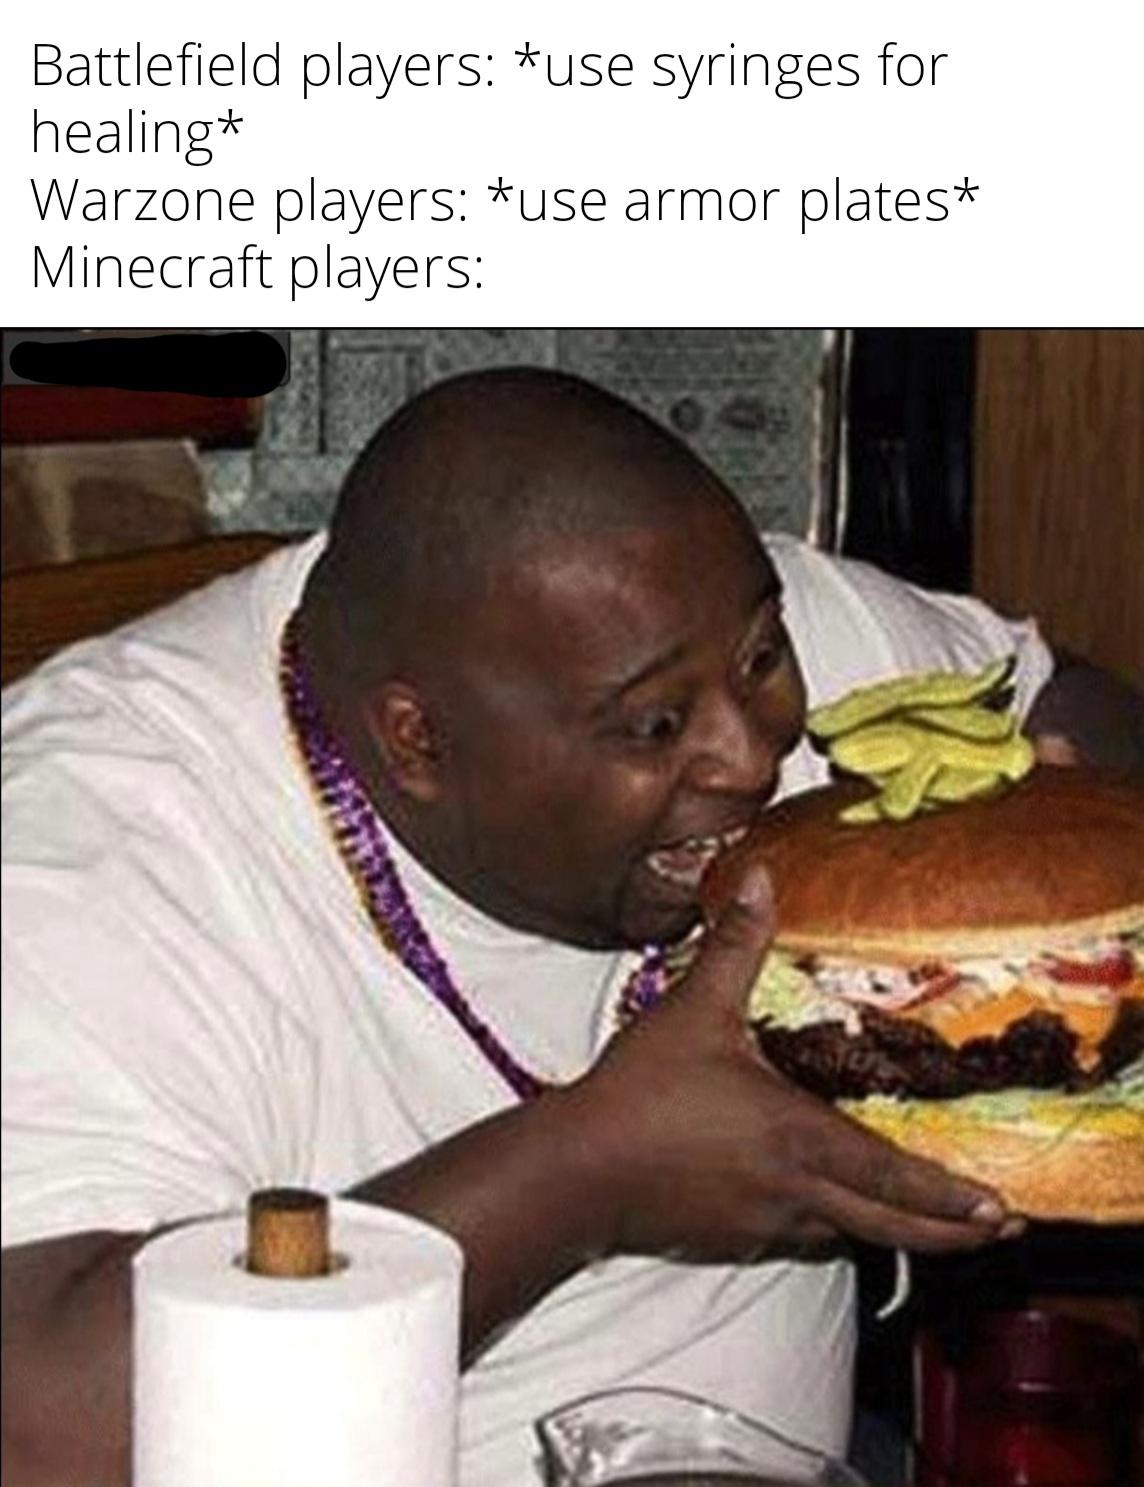 hilarious memes - biggest burger in the world - Battlefield players use syringes for healing Warzone players use armor plates Minecraft players